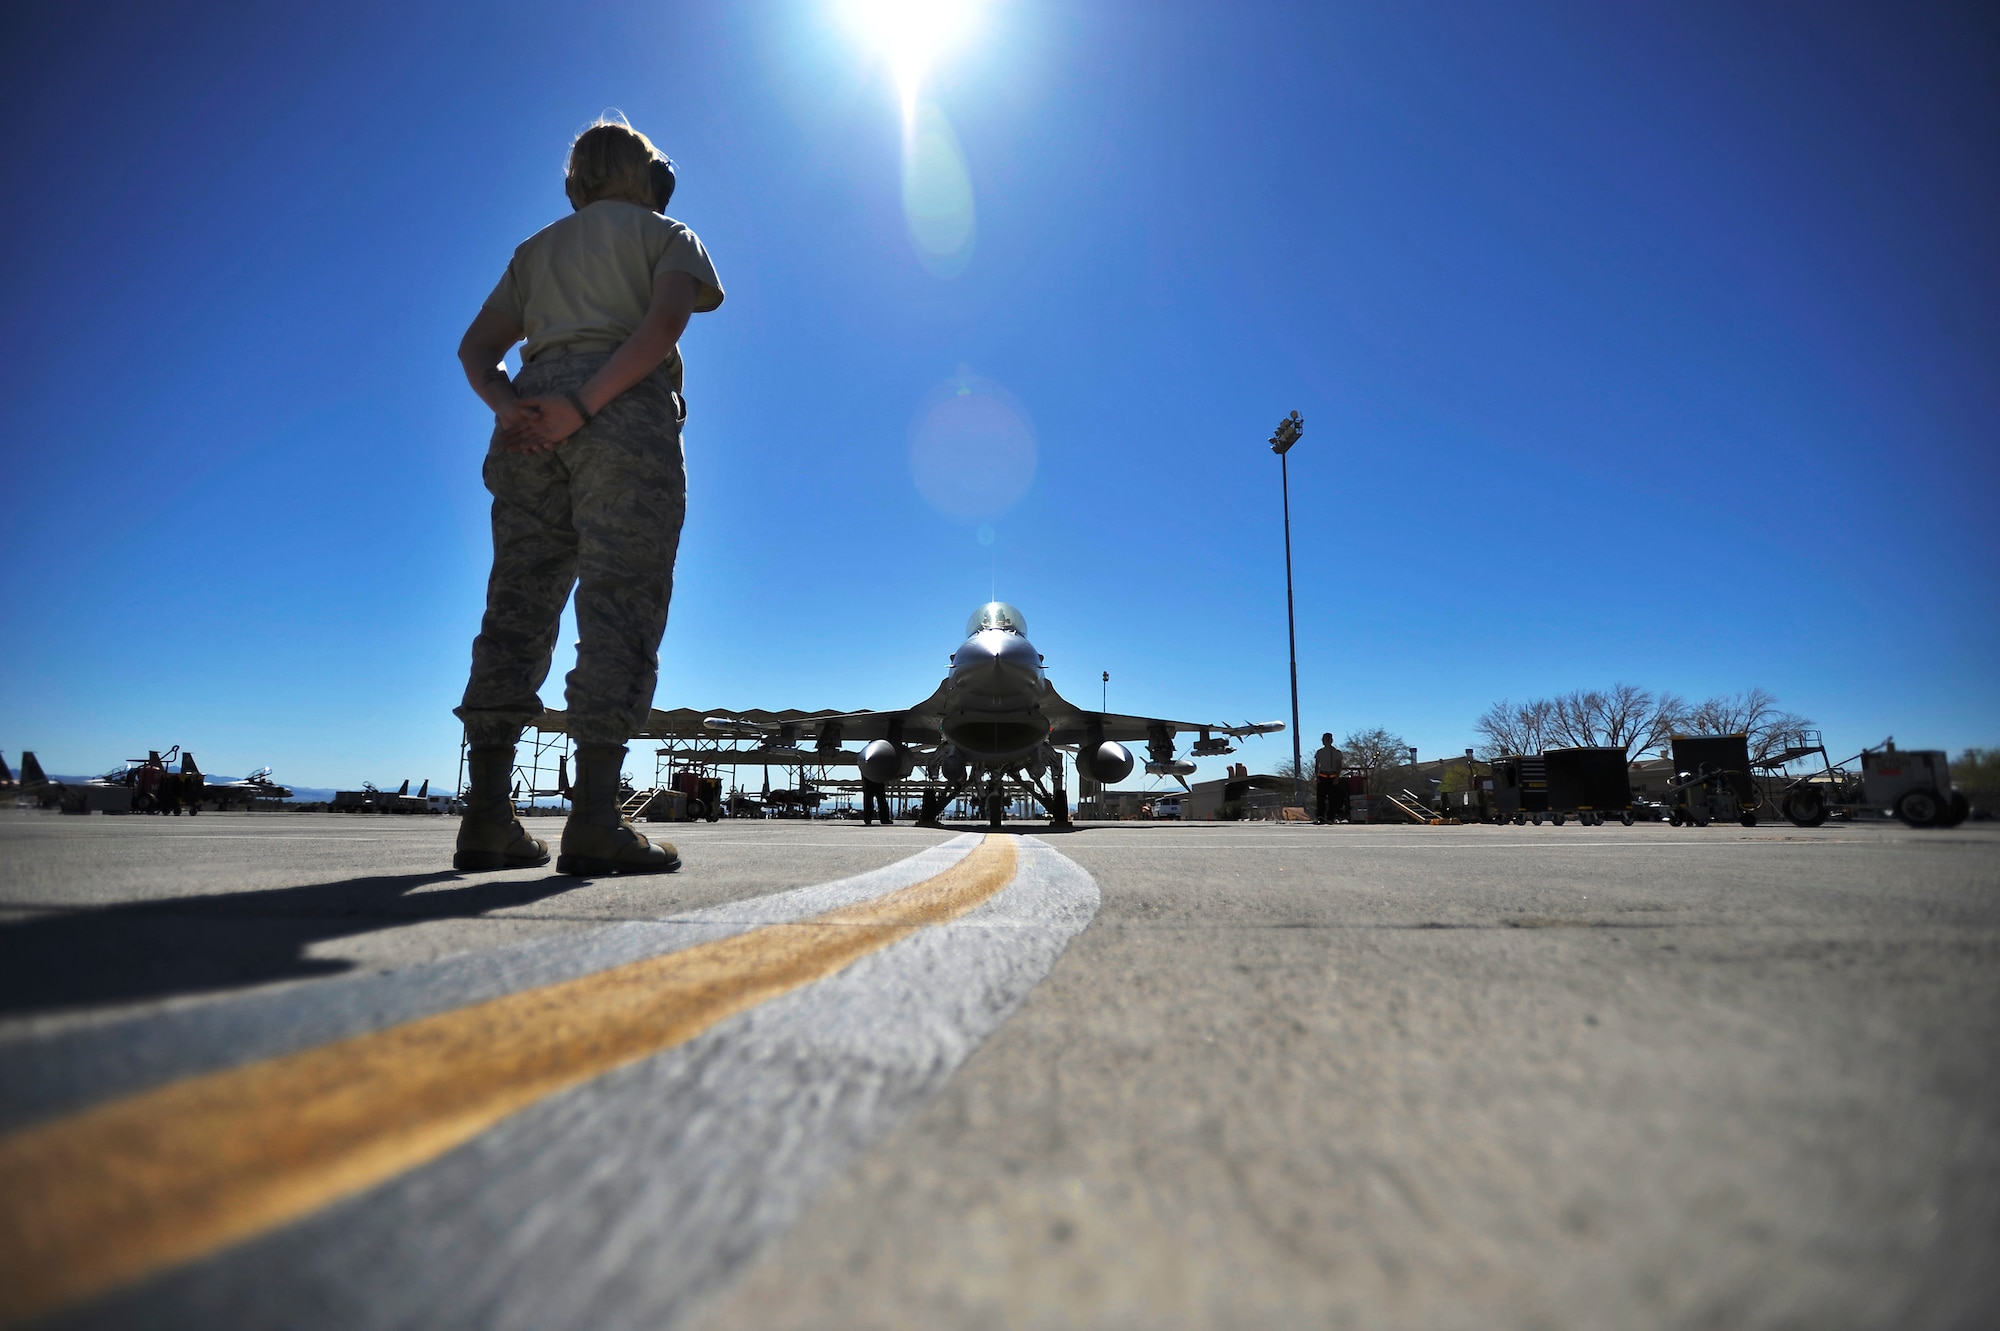 U.S. Air Force Staff Sgt. Elizabeth Tyburski, 20th Communications Squadron client service technician, stands in position to marshall a 79th Fighter Squadron ‘Tigers’ F-16 Fighting Falcon during Red Flag 13-3, March 12, 2013, Nellis Air Force Base, Nev. Tyburski received the rare opportunity to launch an F-16 and experienced what it’s like to be a crew chief. (U.S. Air Force photo by Staff Sgt. Kenny Holston/Released)